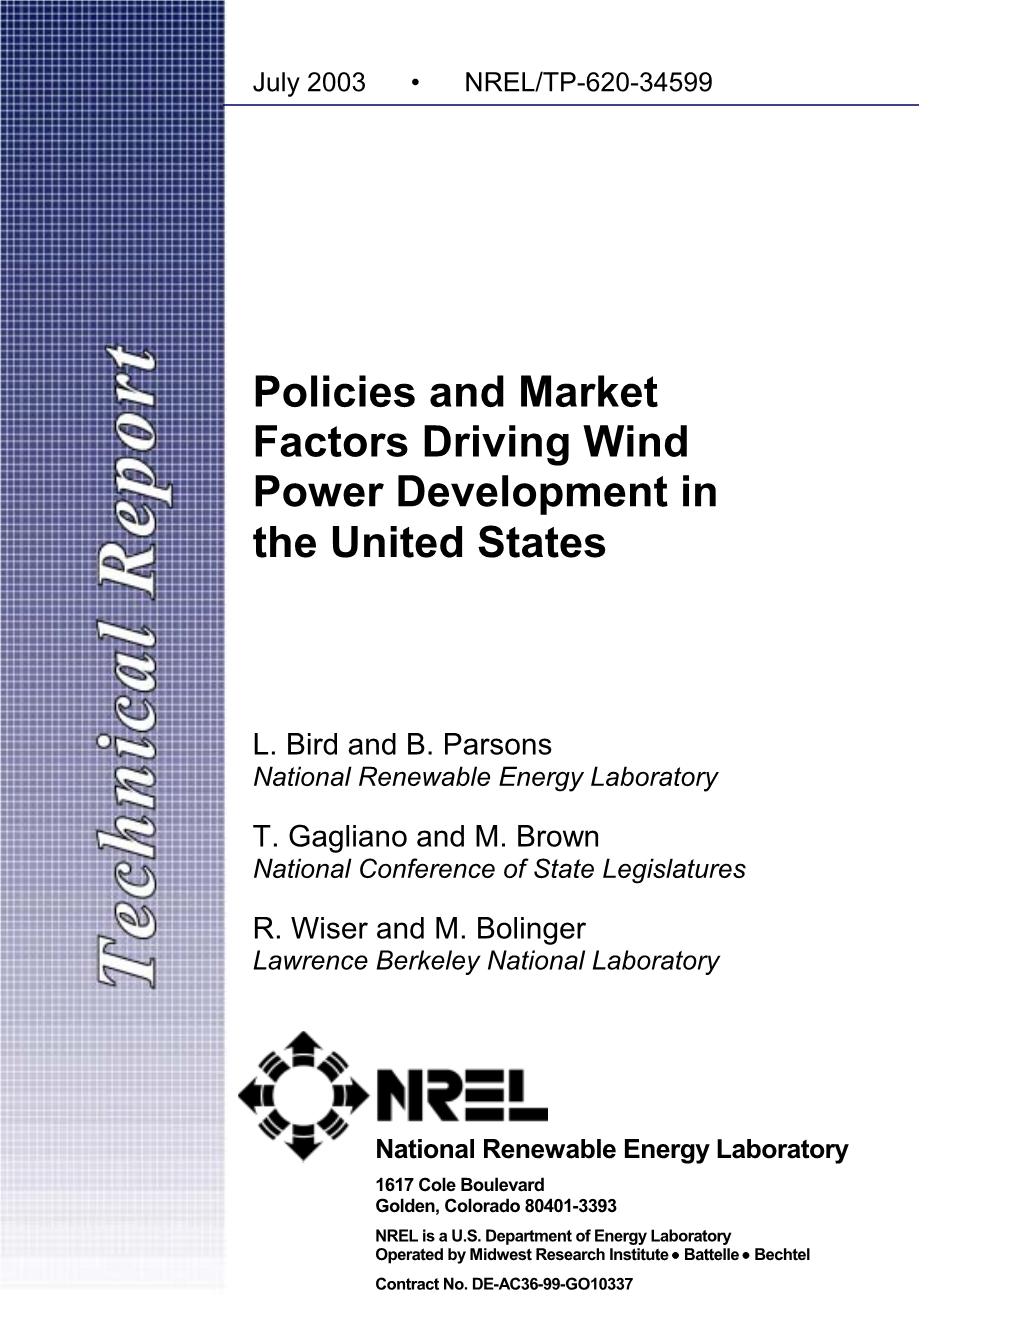 Policies and Market Factors Driving Wind Power Development in the United States